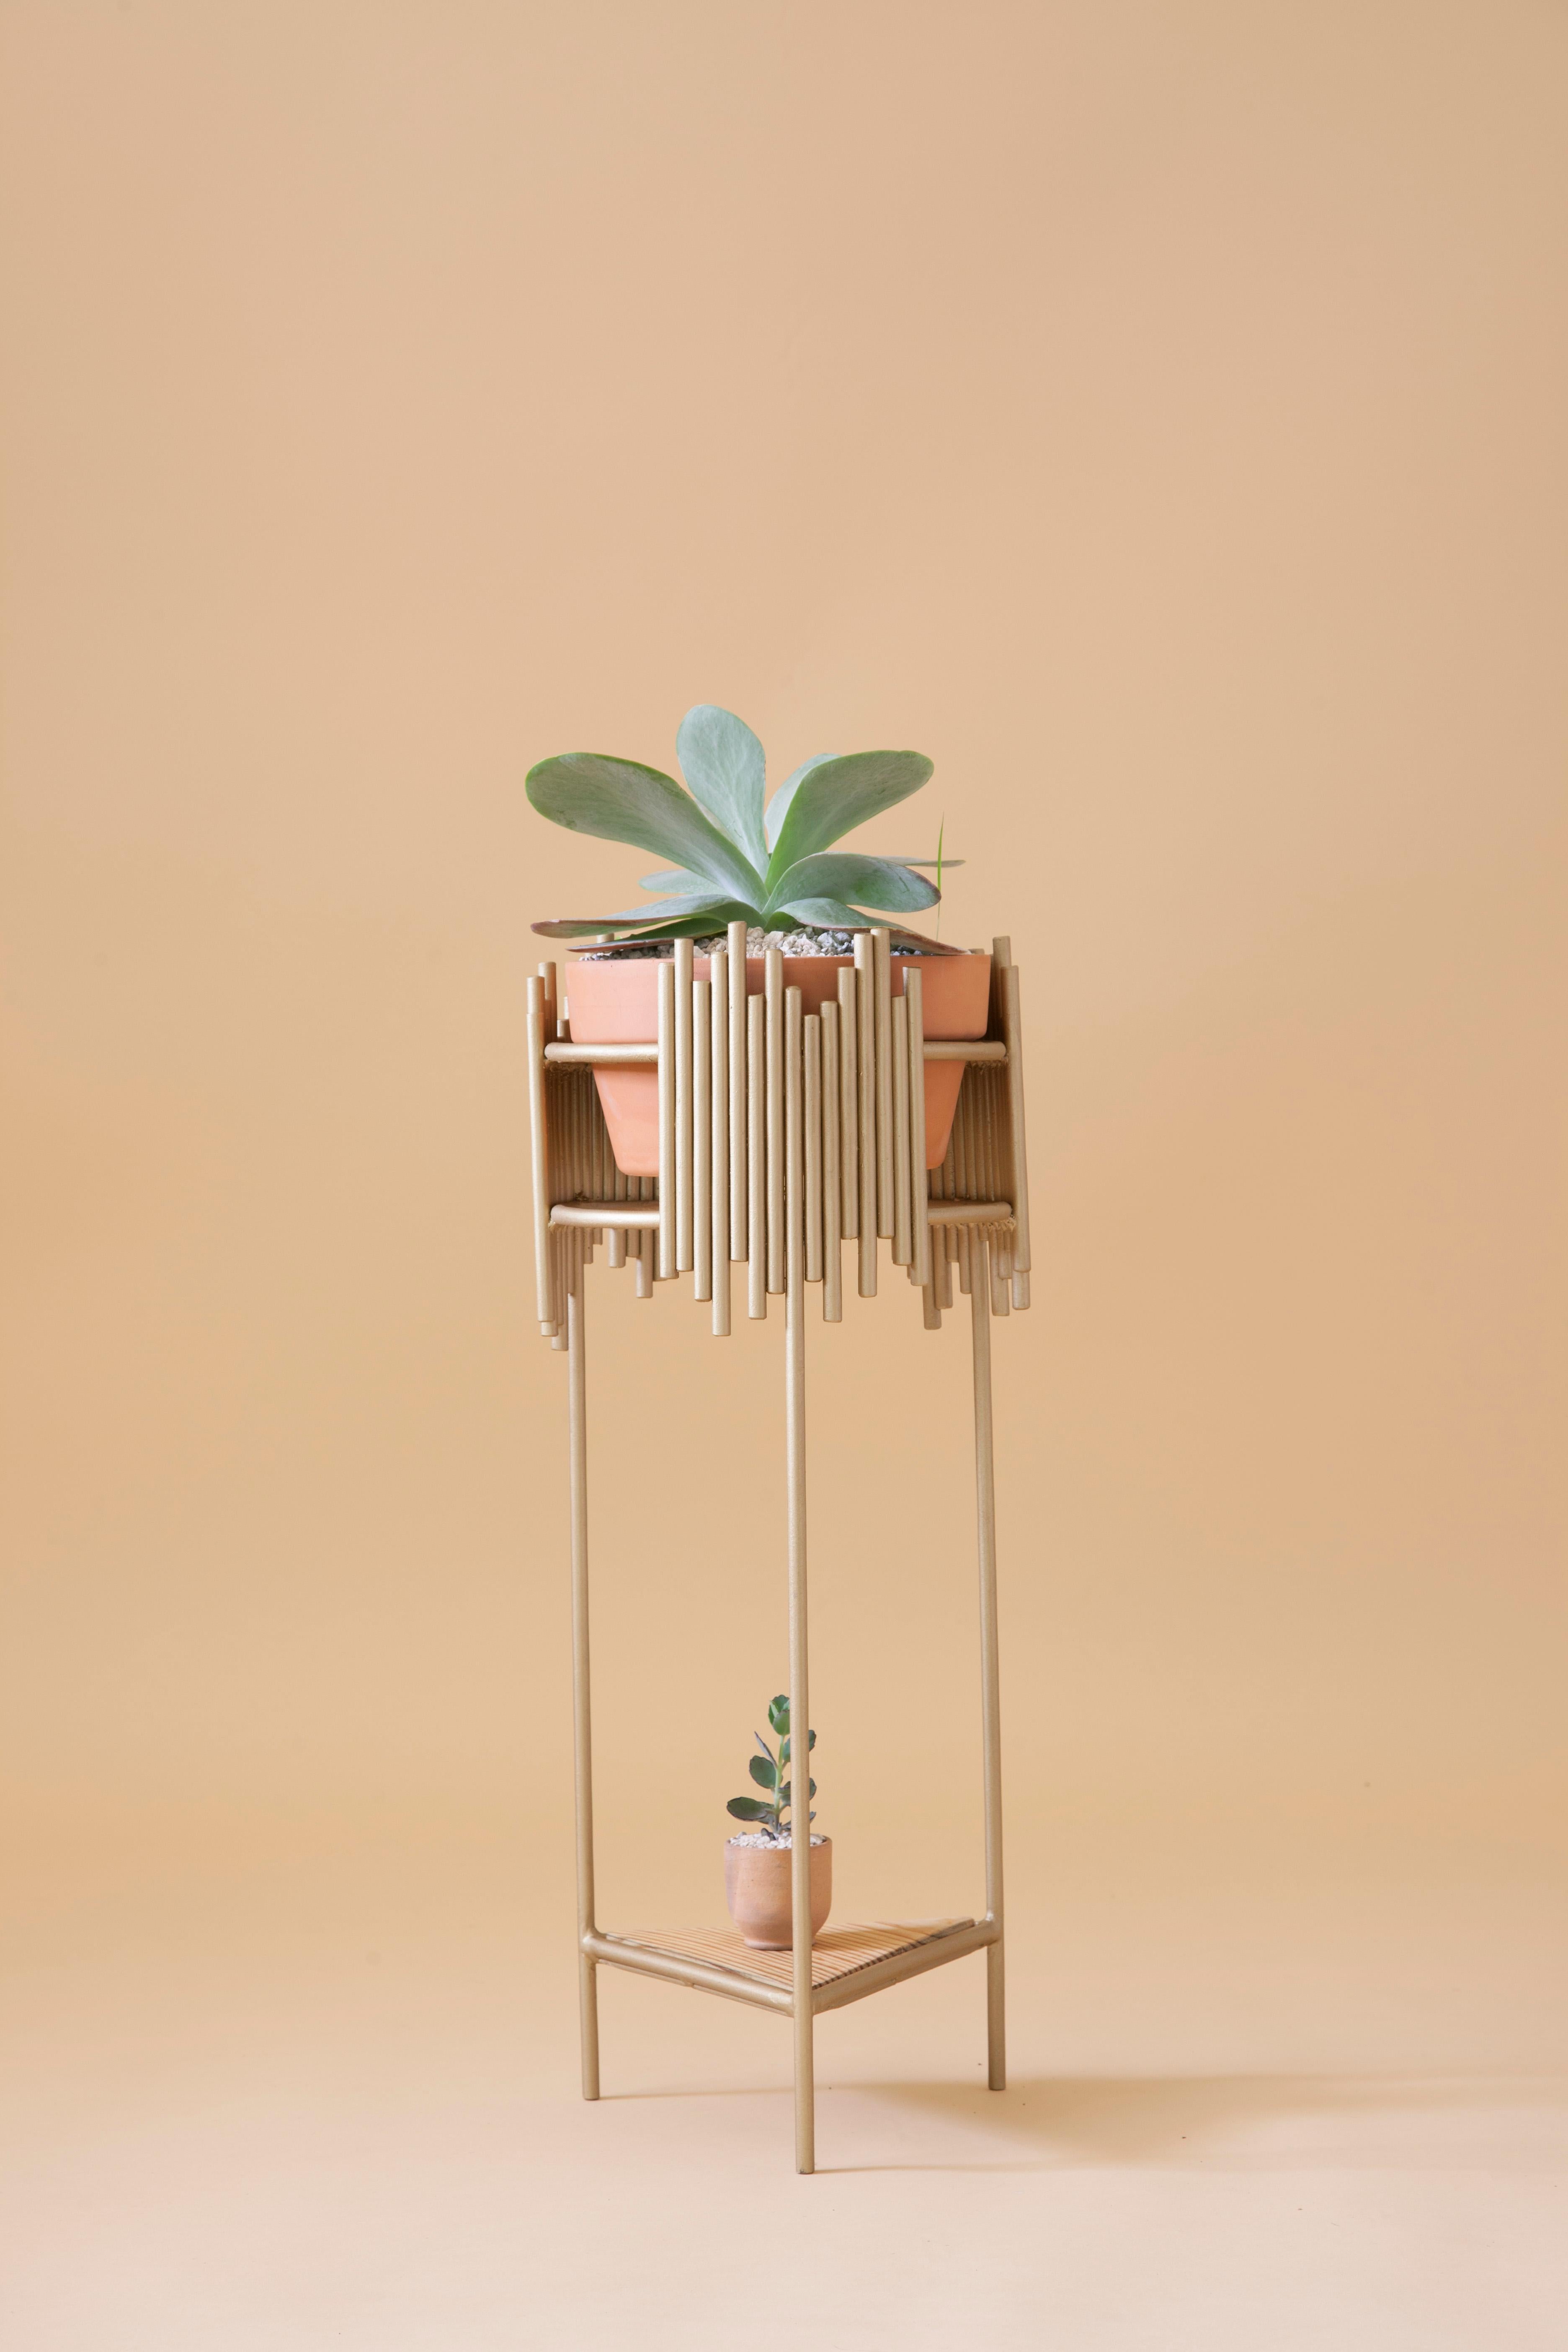 Aurea Plant Stand 1 by Sofia Alvarado
Limited edition 1 of 10 (one in stock)
Materials: Metal & Woods / Golden, white or black.
Dimensions: W 32 x D 32 x H 86 cm

FI is an ornamental artist who embodies the creative Revelation of the sensitivity of